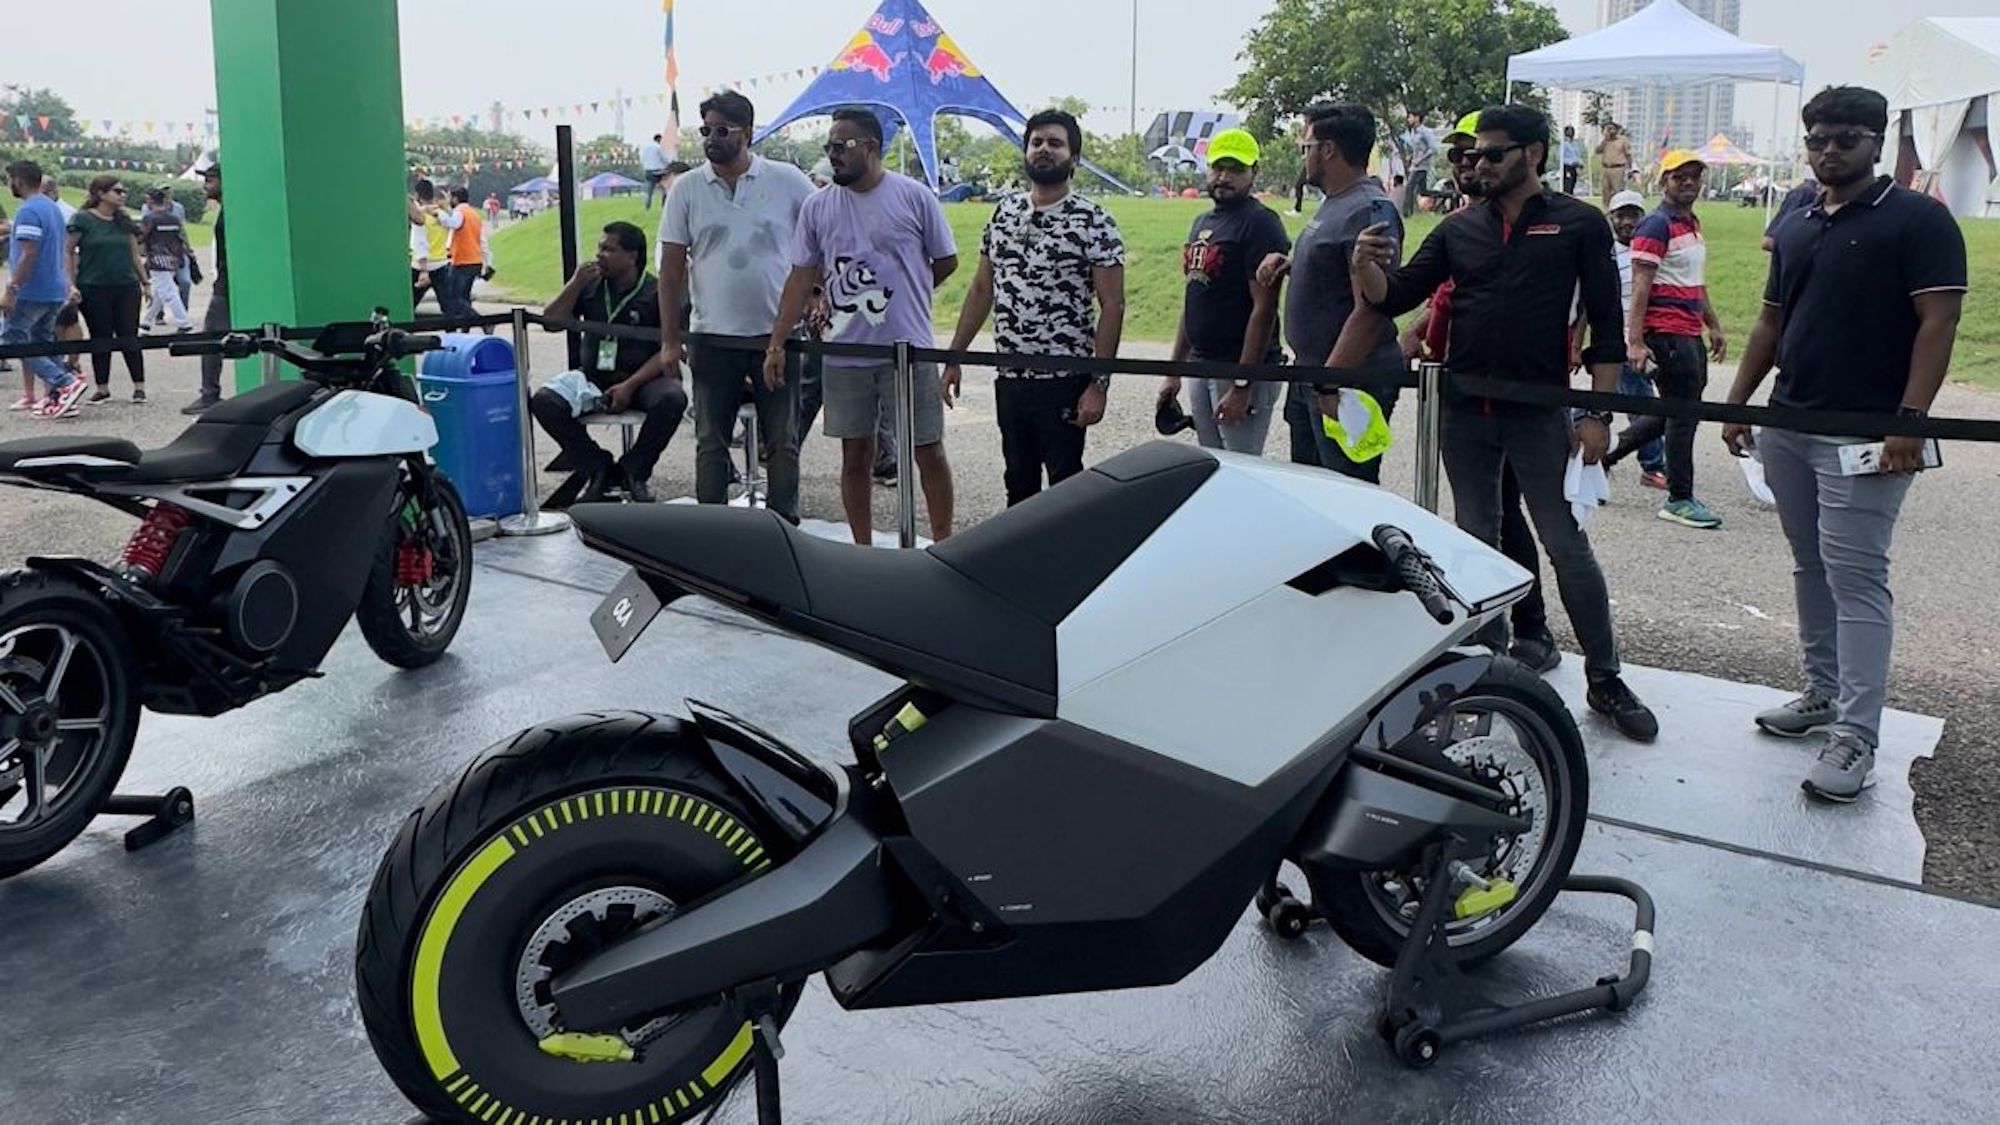 A view of Ola Electric's zero-emission motorcycles, debuted at MotoGP Bharat. Media sourced from Ola Electric.